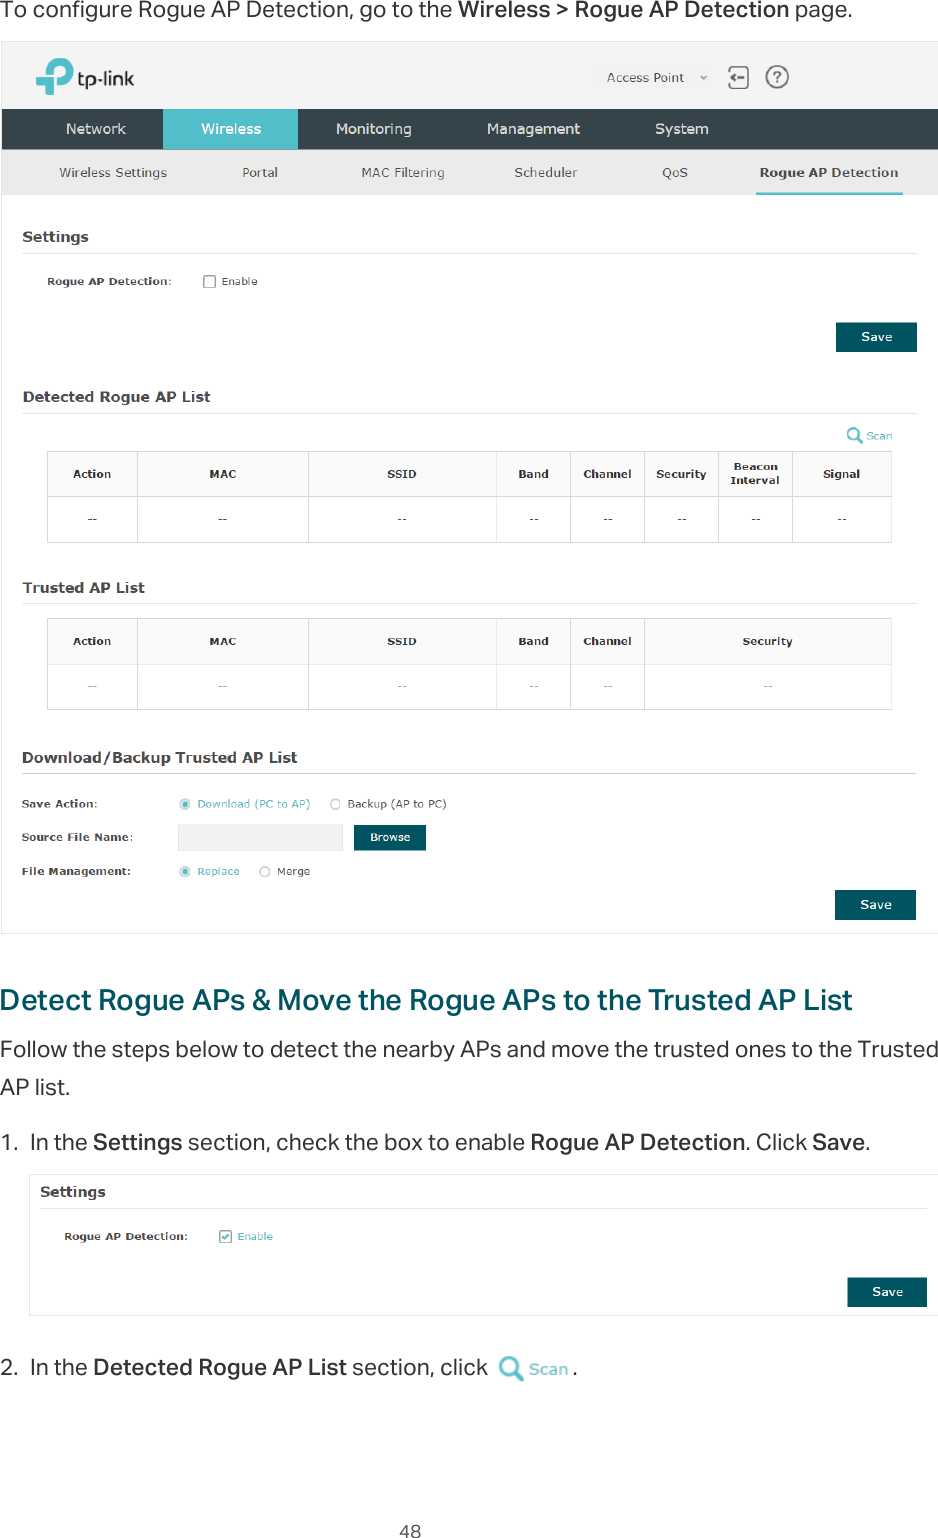  48To configure Rogue AP Detection, go to the Wireless &gt; Rogue AP Detection page.Detect Rogue APs &amp; Move the Rogue APs to the Trusted AP ListFollow the steps below to detect the nearby APs and move the trusted ones to the Trusted AP list.1. In the Settings section, check the box to enable Rogue AP Detection. Click Save.2. In the Detected Rogue AP List section, click  .